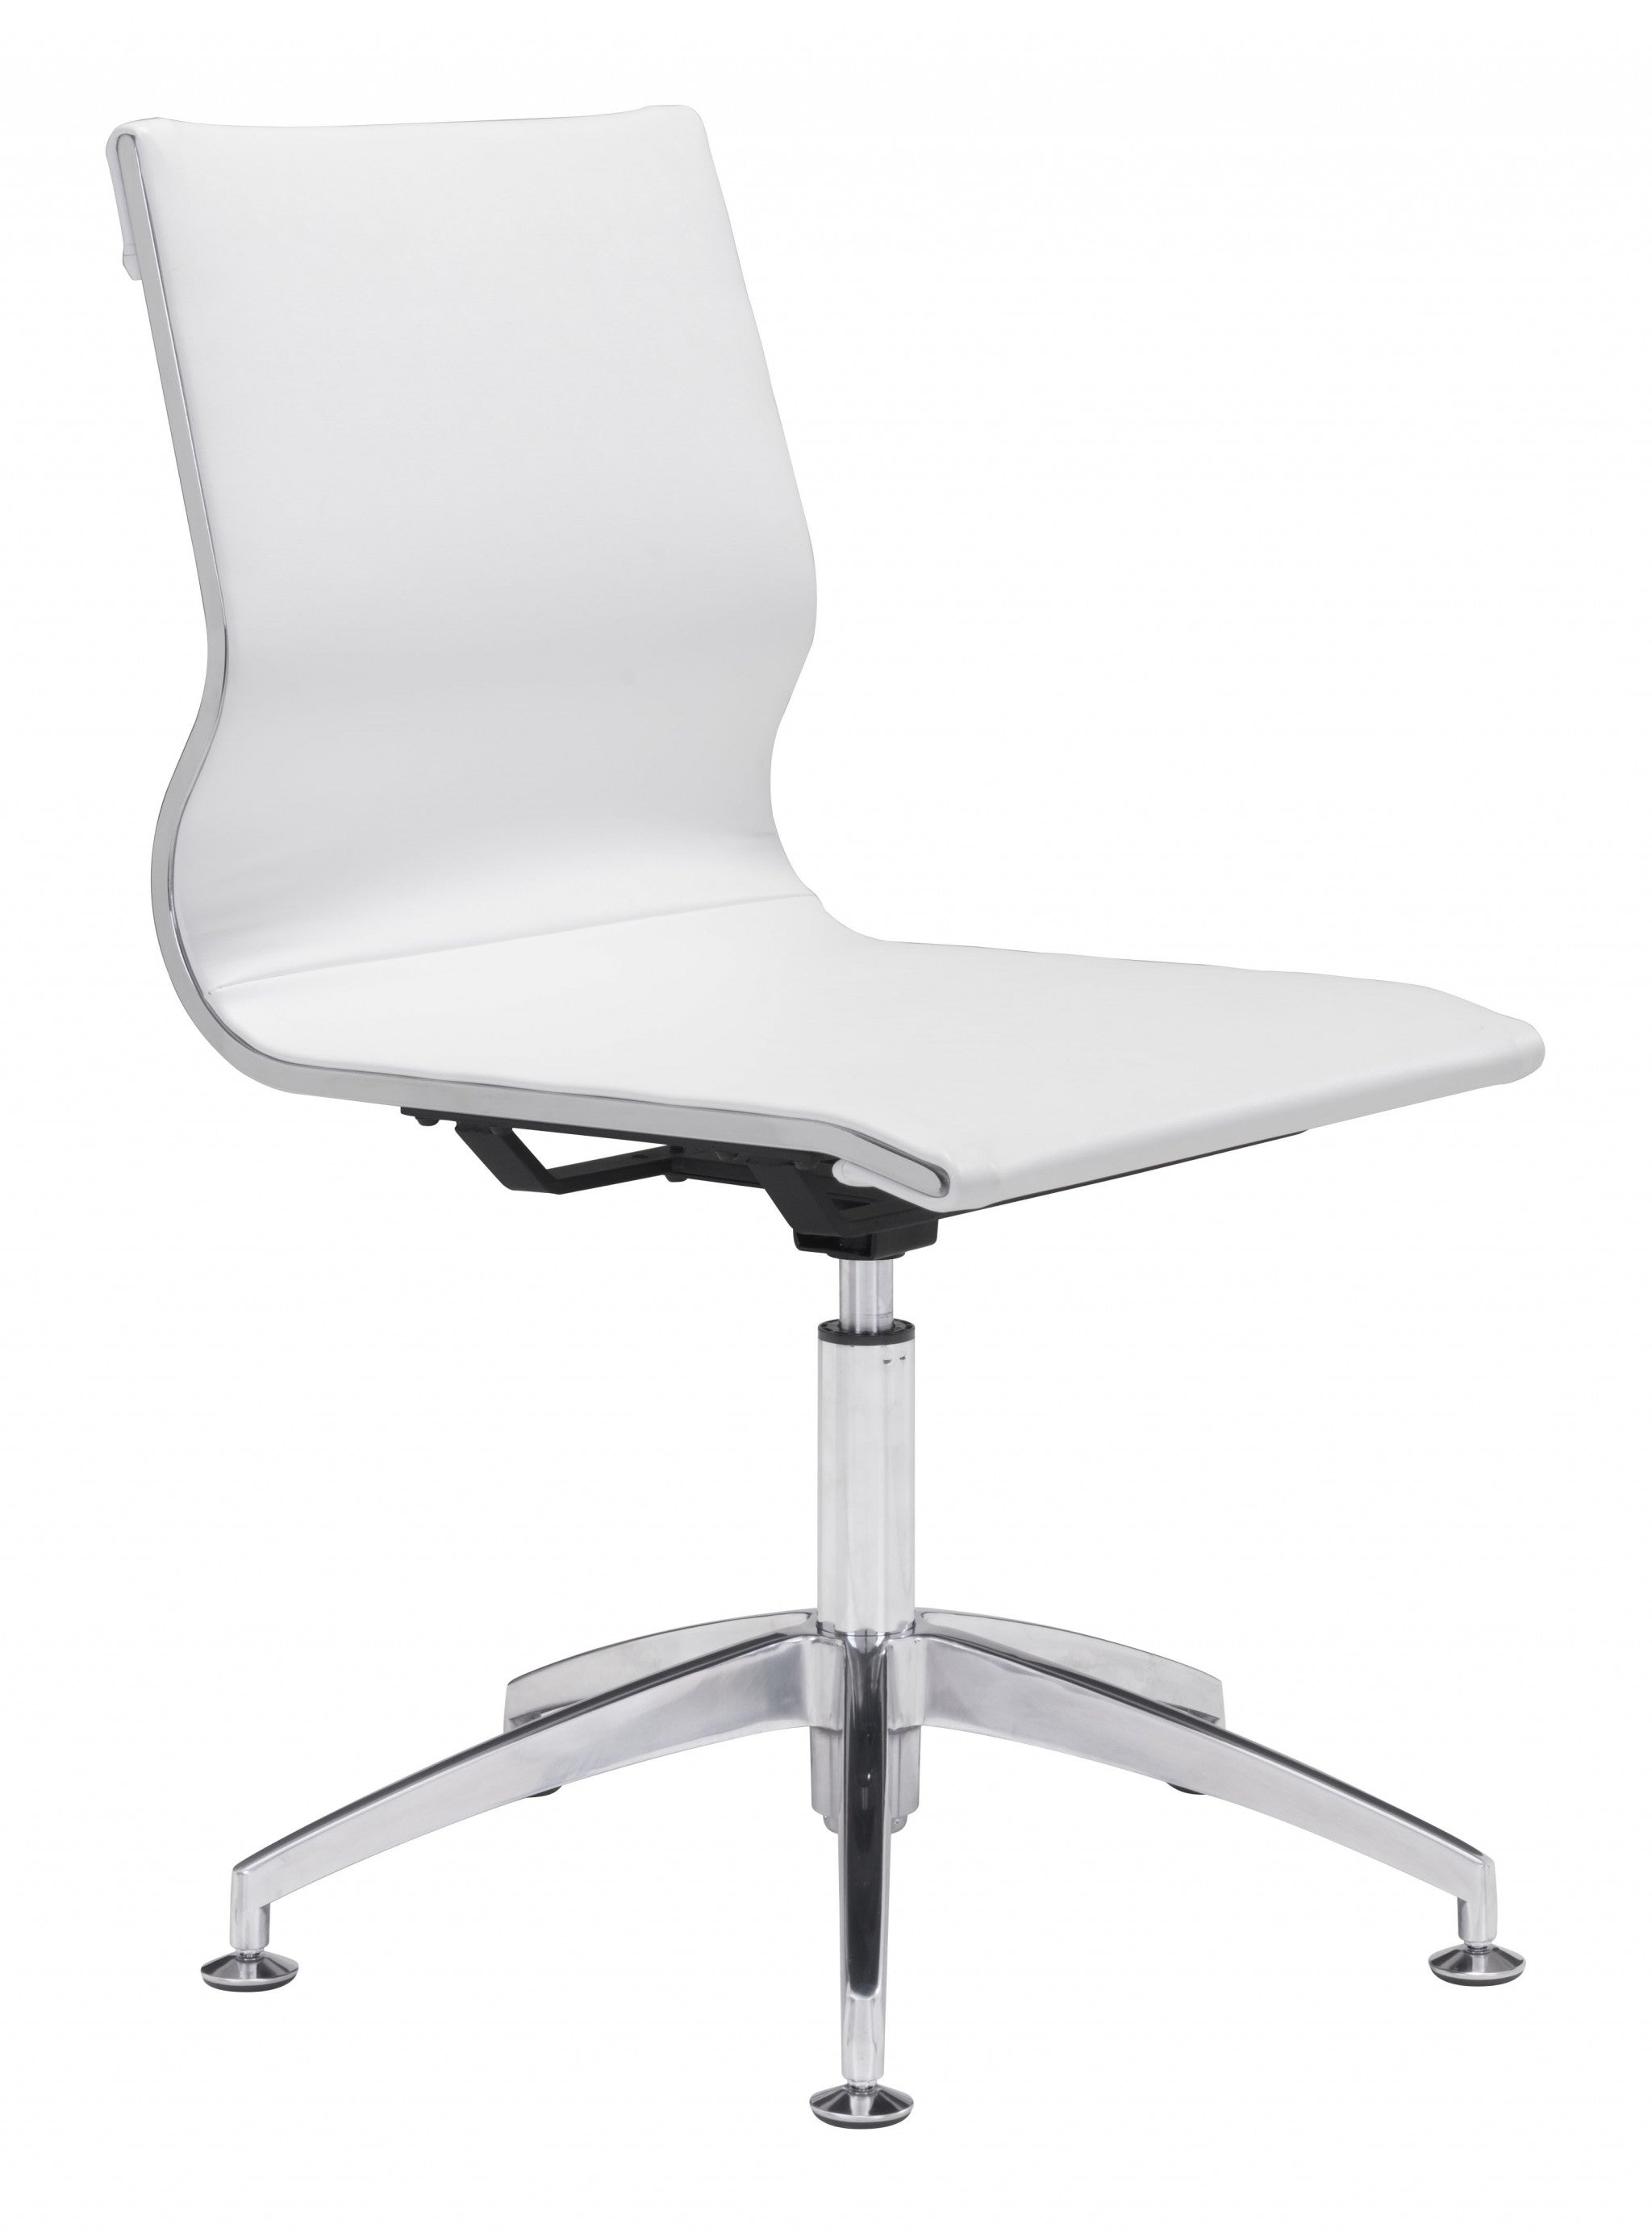 White-Faux-Leather-Seat-Swivel-Adjustable-Conference-Chair-Metal-Back-Steel-Frame-Office-Chairs